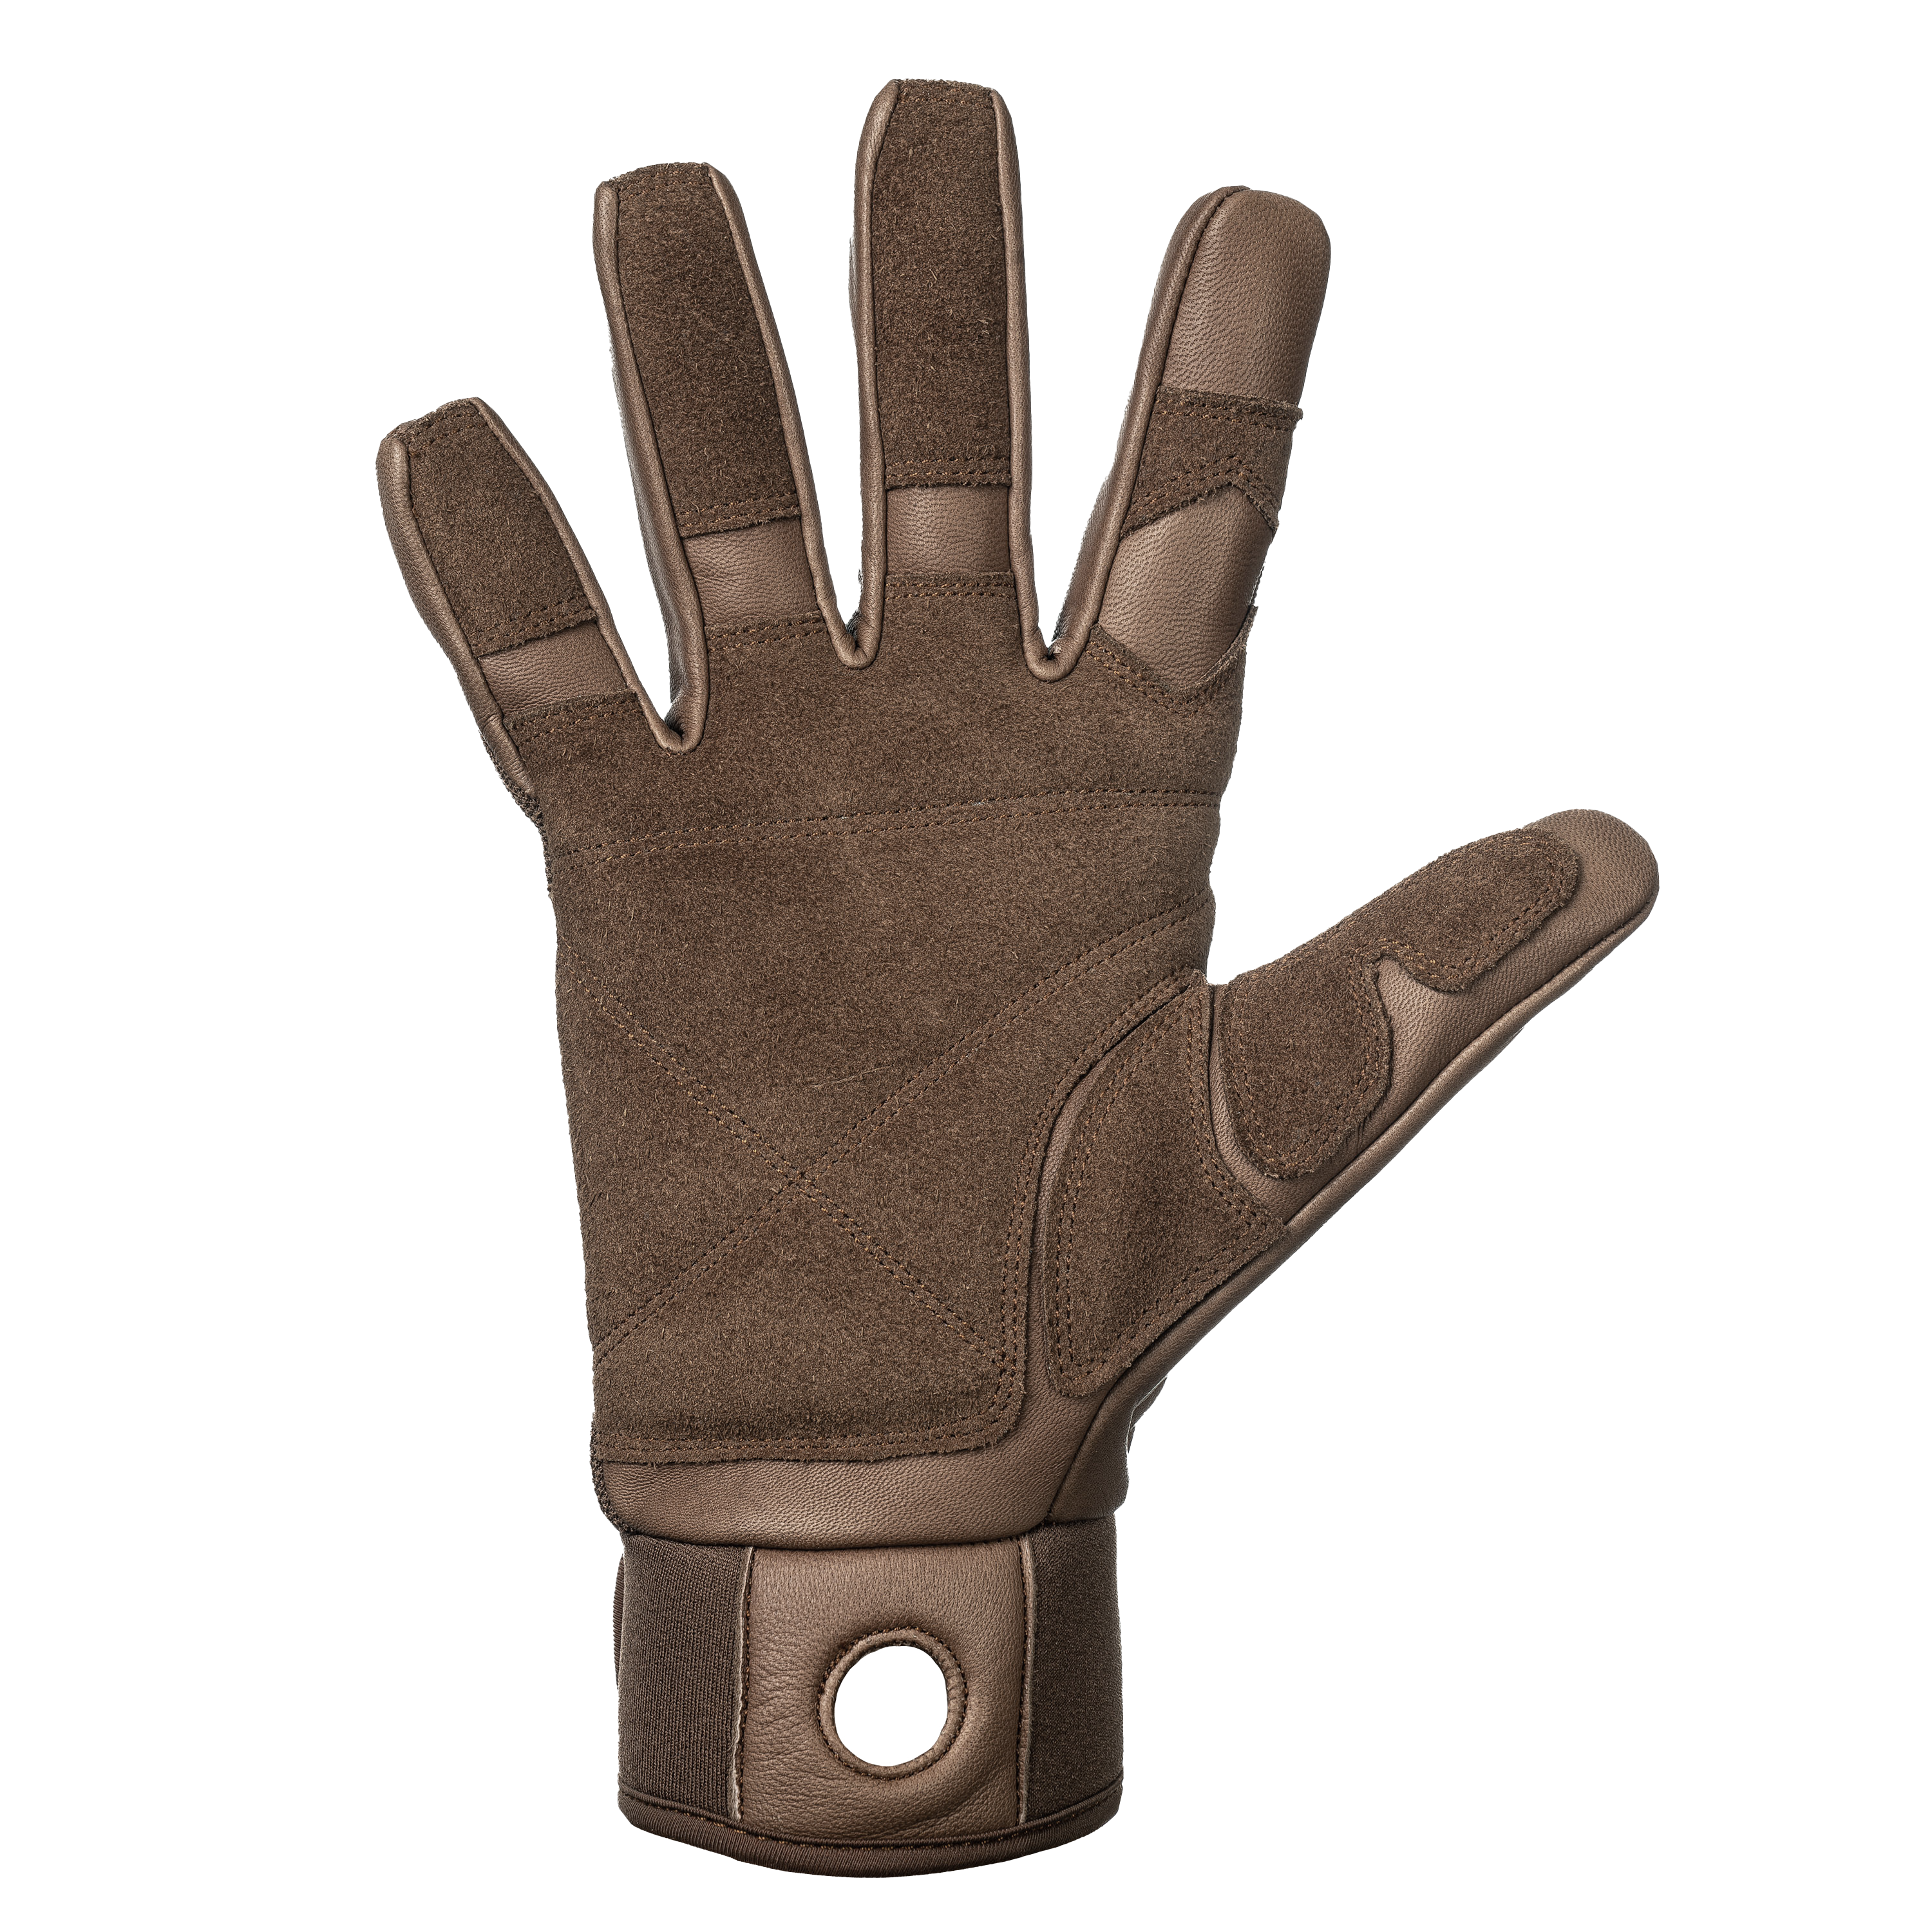 MoG Fast Rope tactical glove